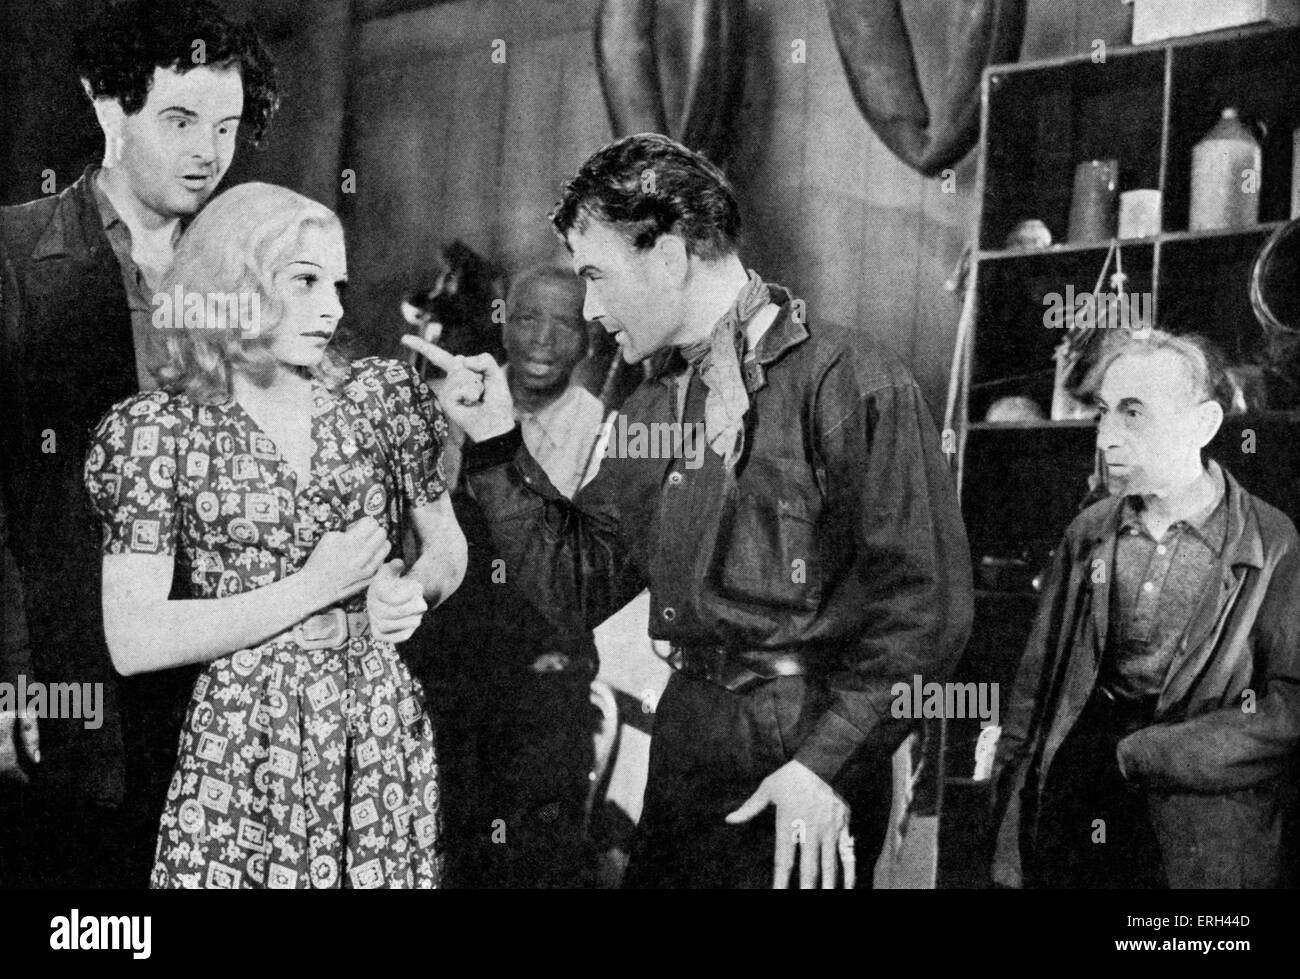 'Of Mice and Men' by John Steinbeck, with John Mills, Niall MacGinnis and Claire Luce at the Apollo Theatre, London, July 1939. Stock Photo